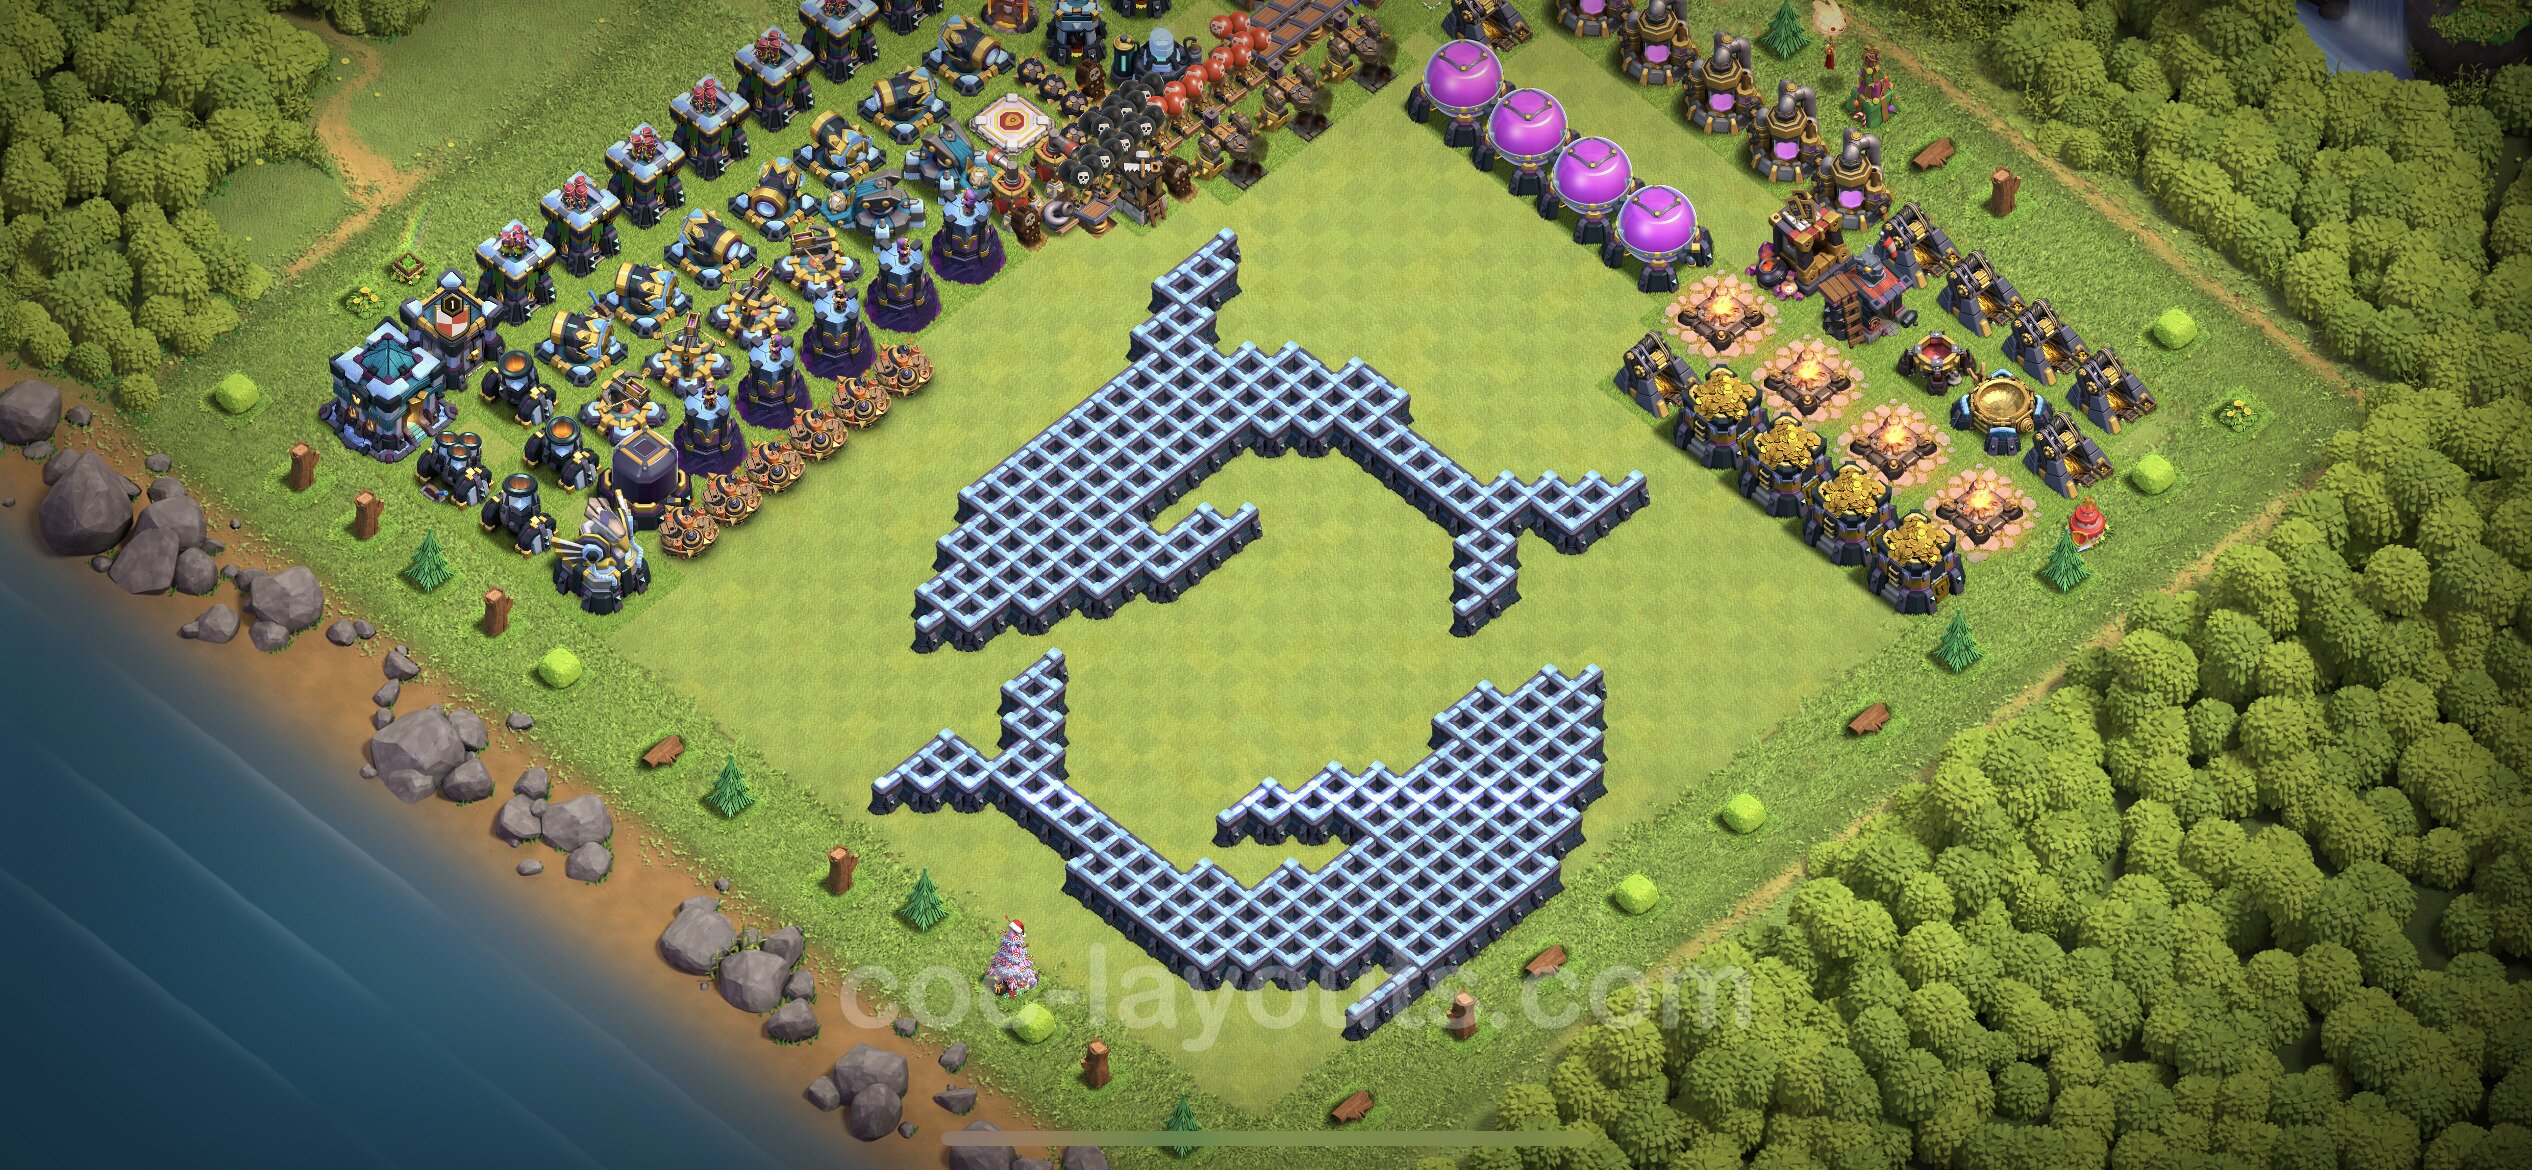 Best Funny Troll Base TH13 with Link - Town Hall Level 13 Art Base Copy -  (#9)